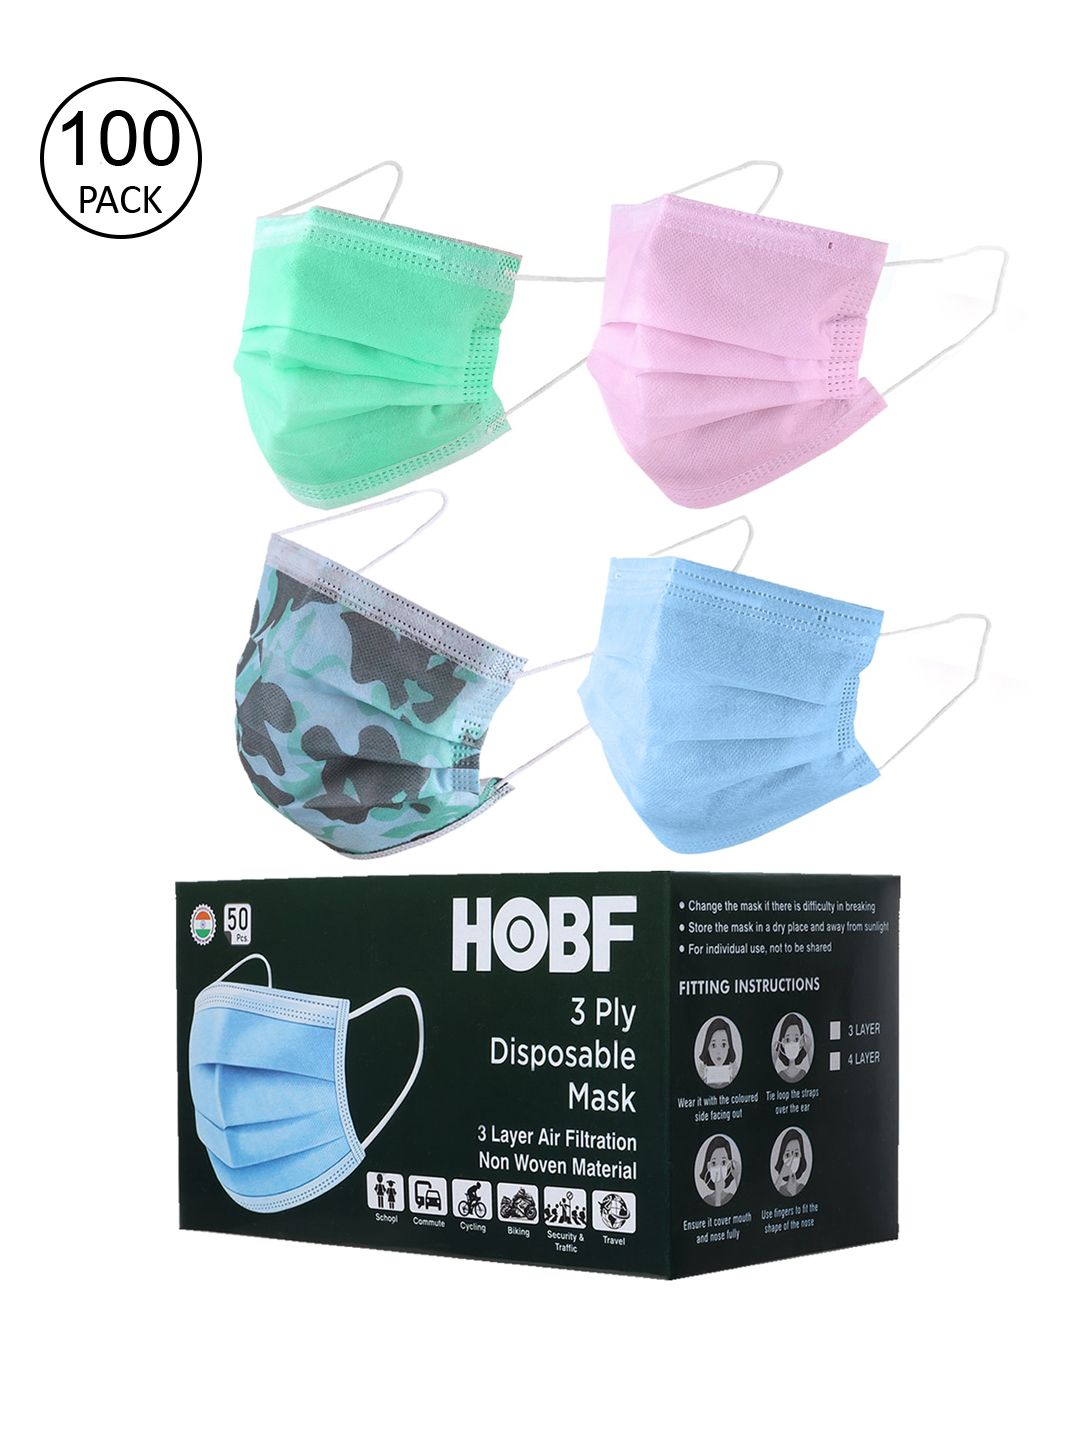 Swiss Design Pack Of 100 Assorted 3-Ply Surgical Masks Price in India